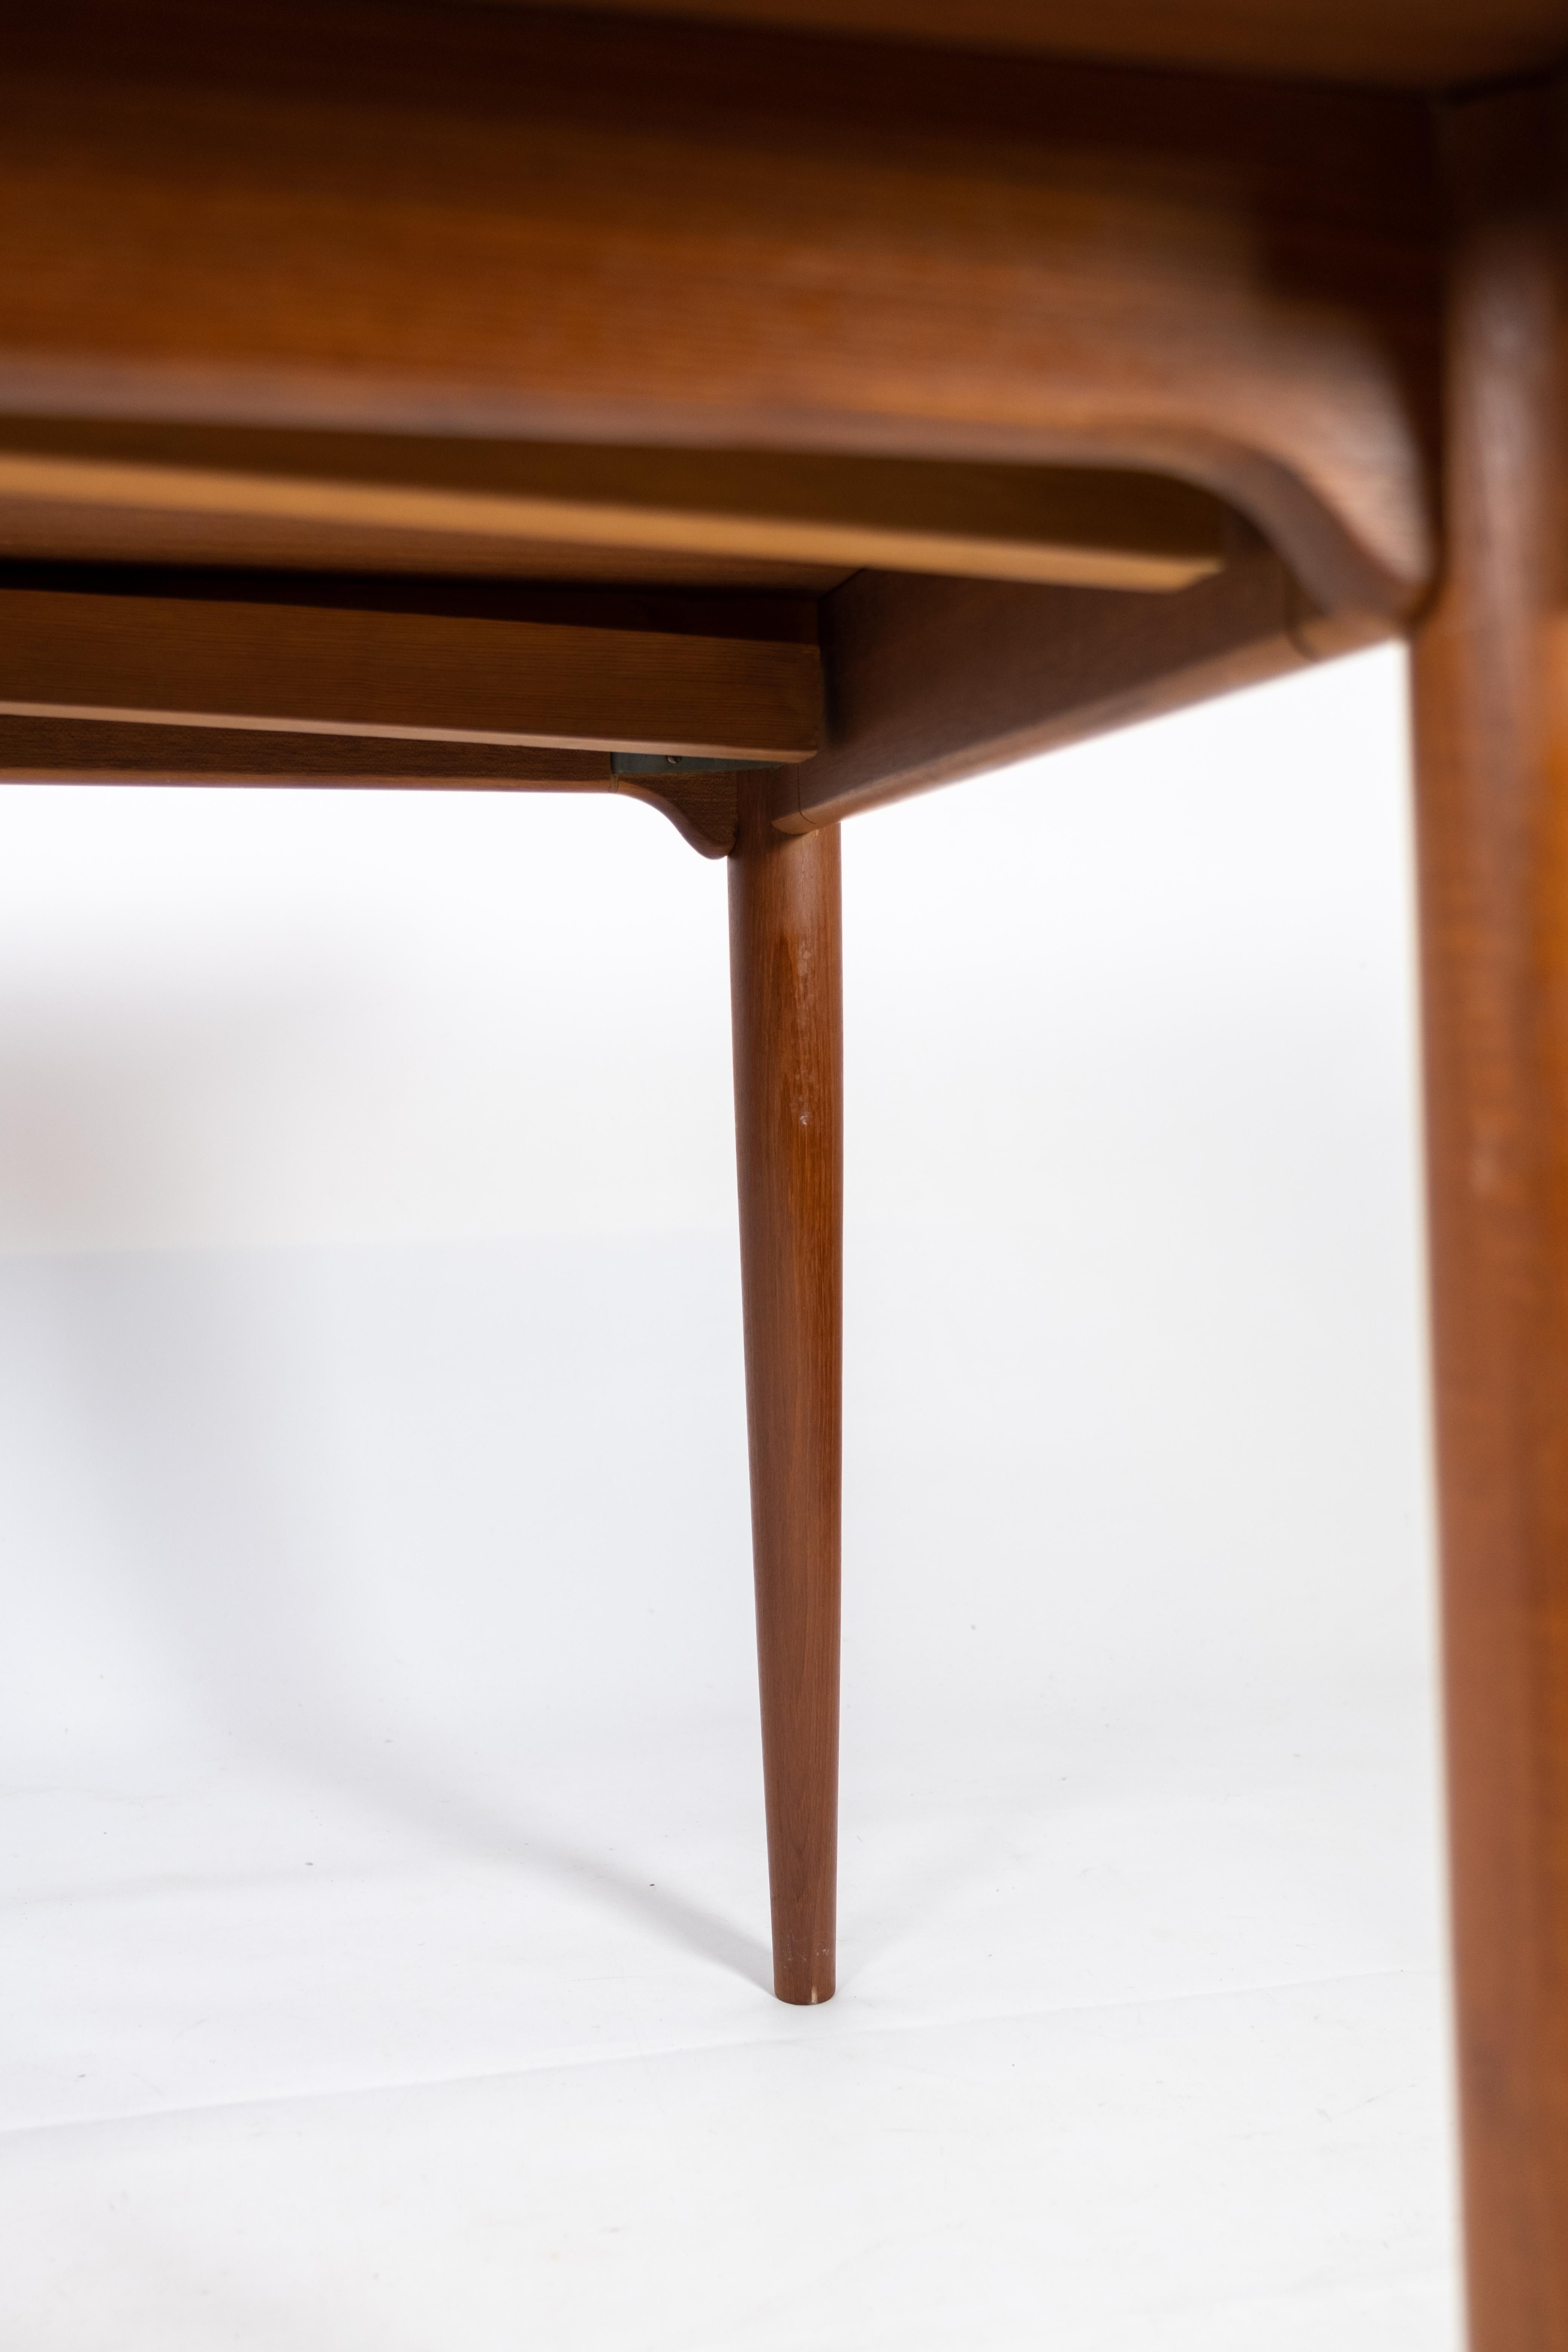 Dining Table Made In Teak With Extentions, Danish Design From 1960s For Sale 3